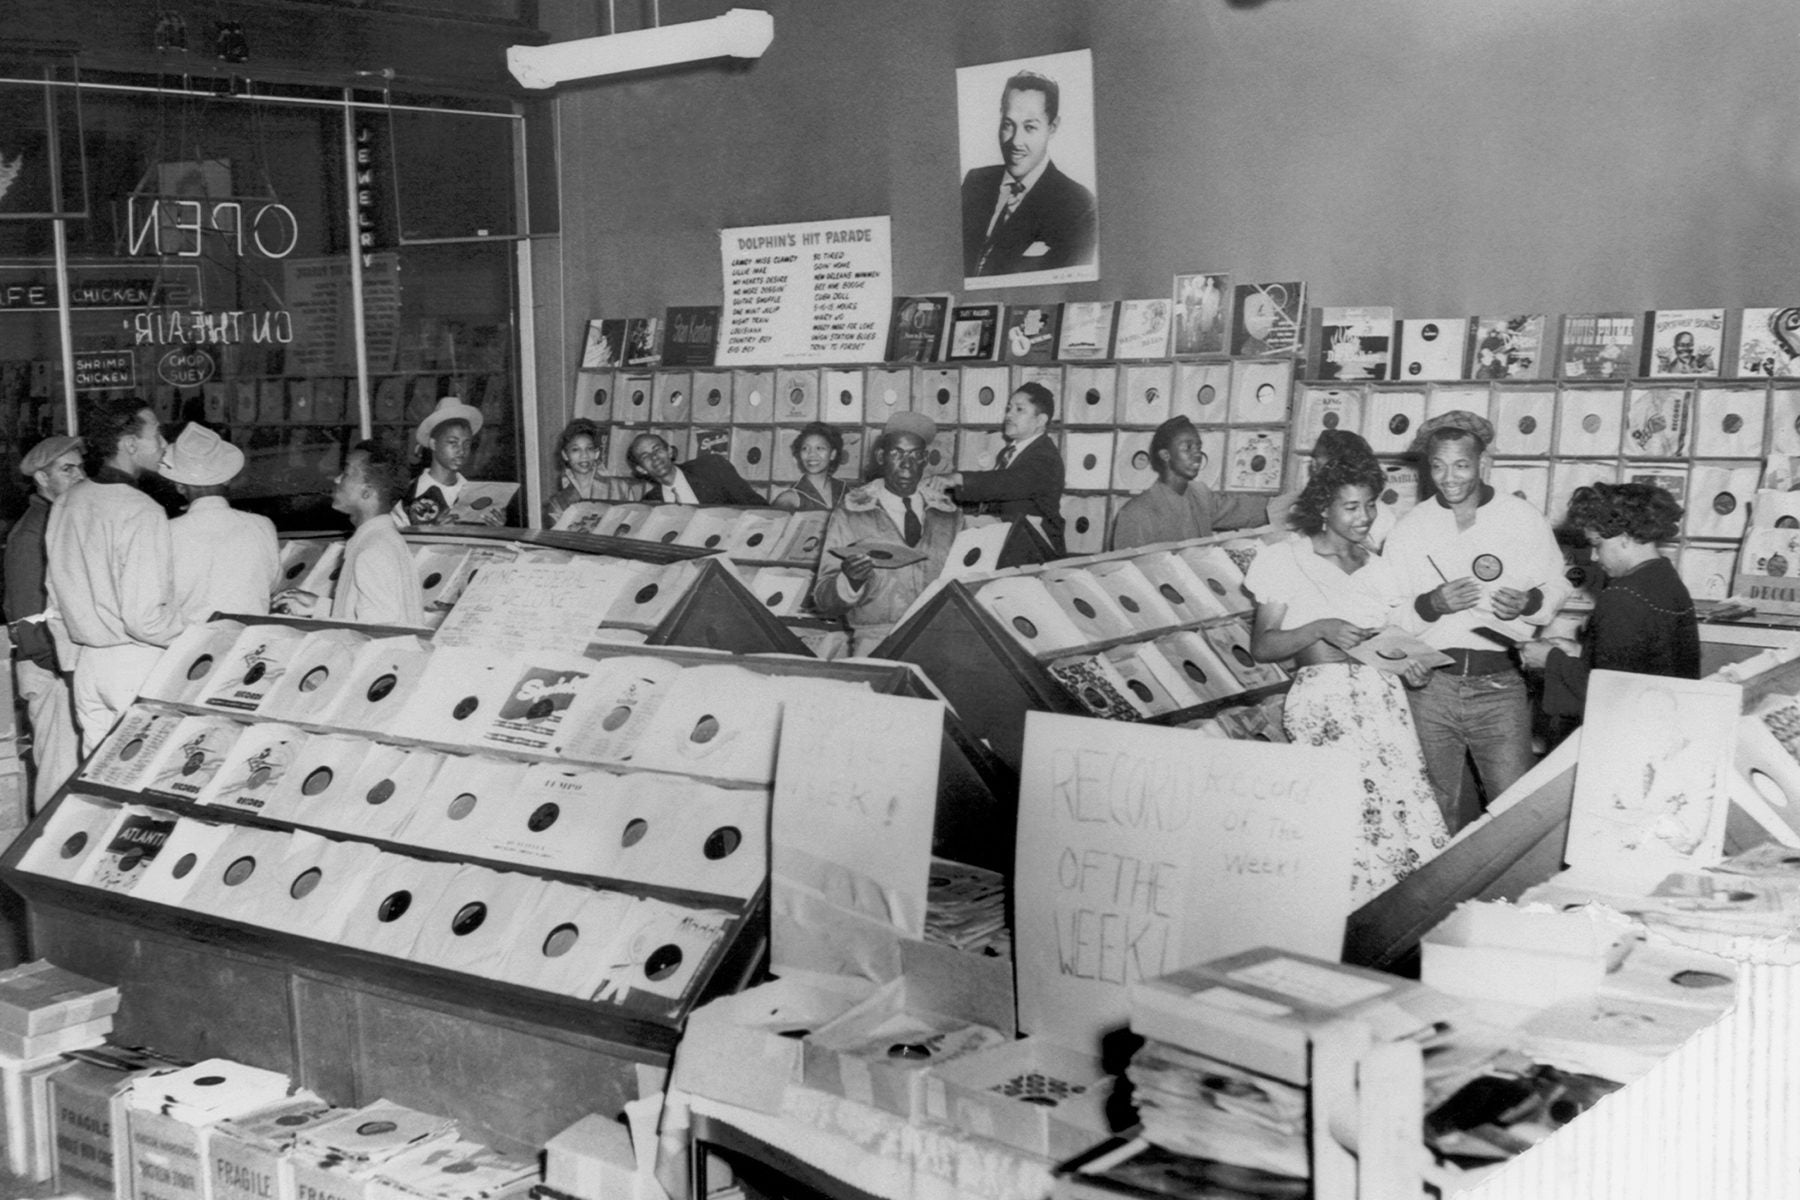 Producer John Dolphin's "Dolphin's Of Hollywood" record store on Central Avenue, 1952